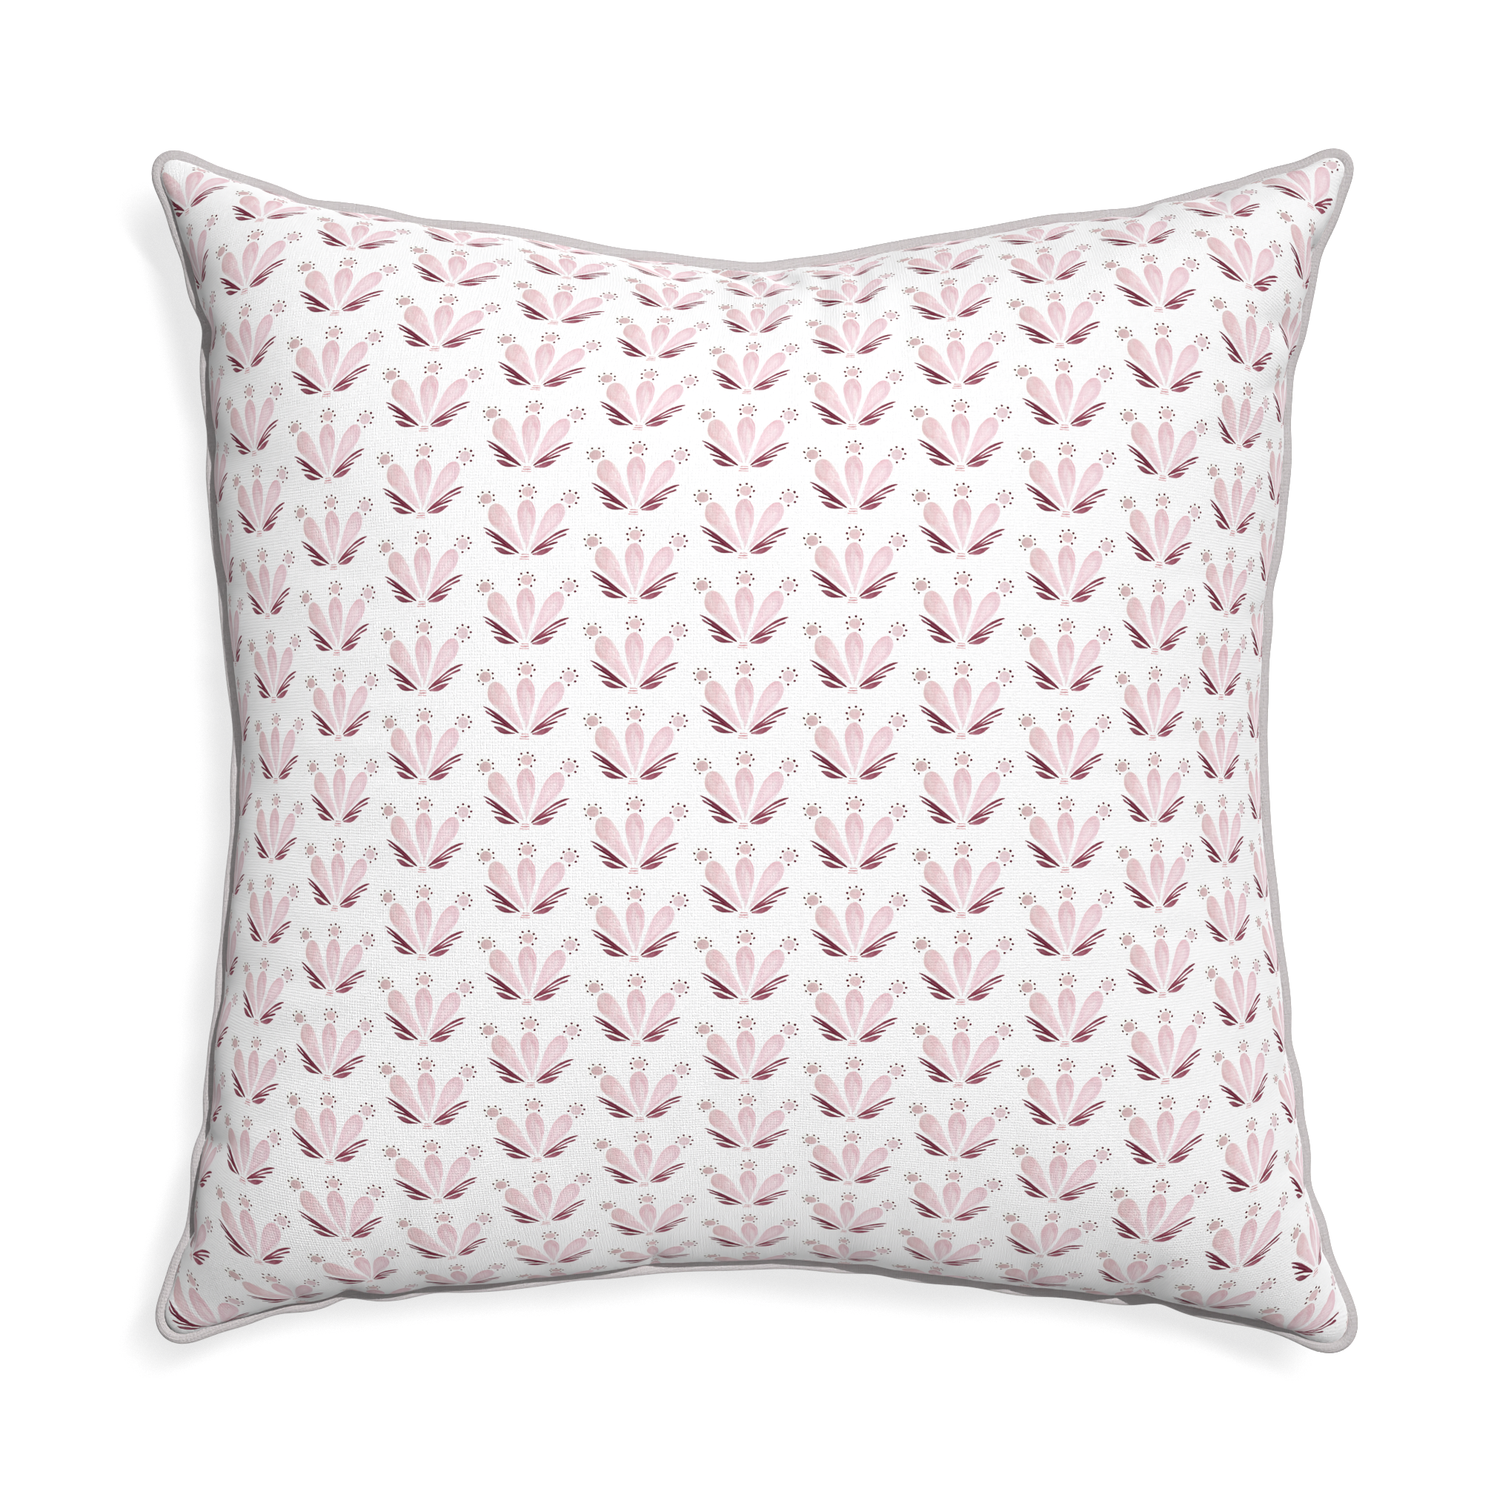 Euro-sham serena pink custom pillow with pebble piping on white background